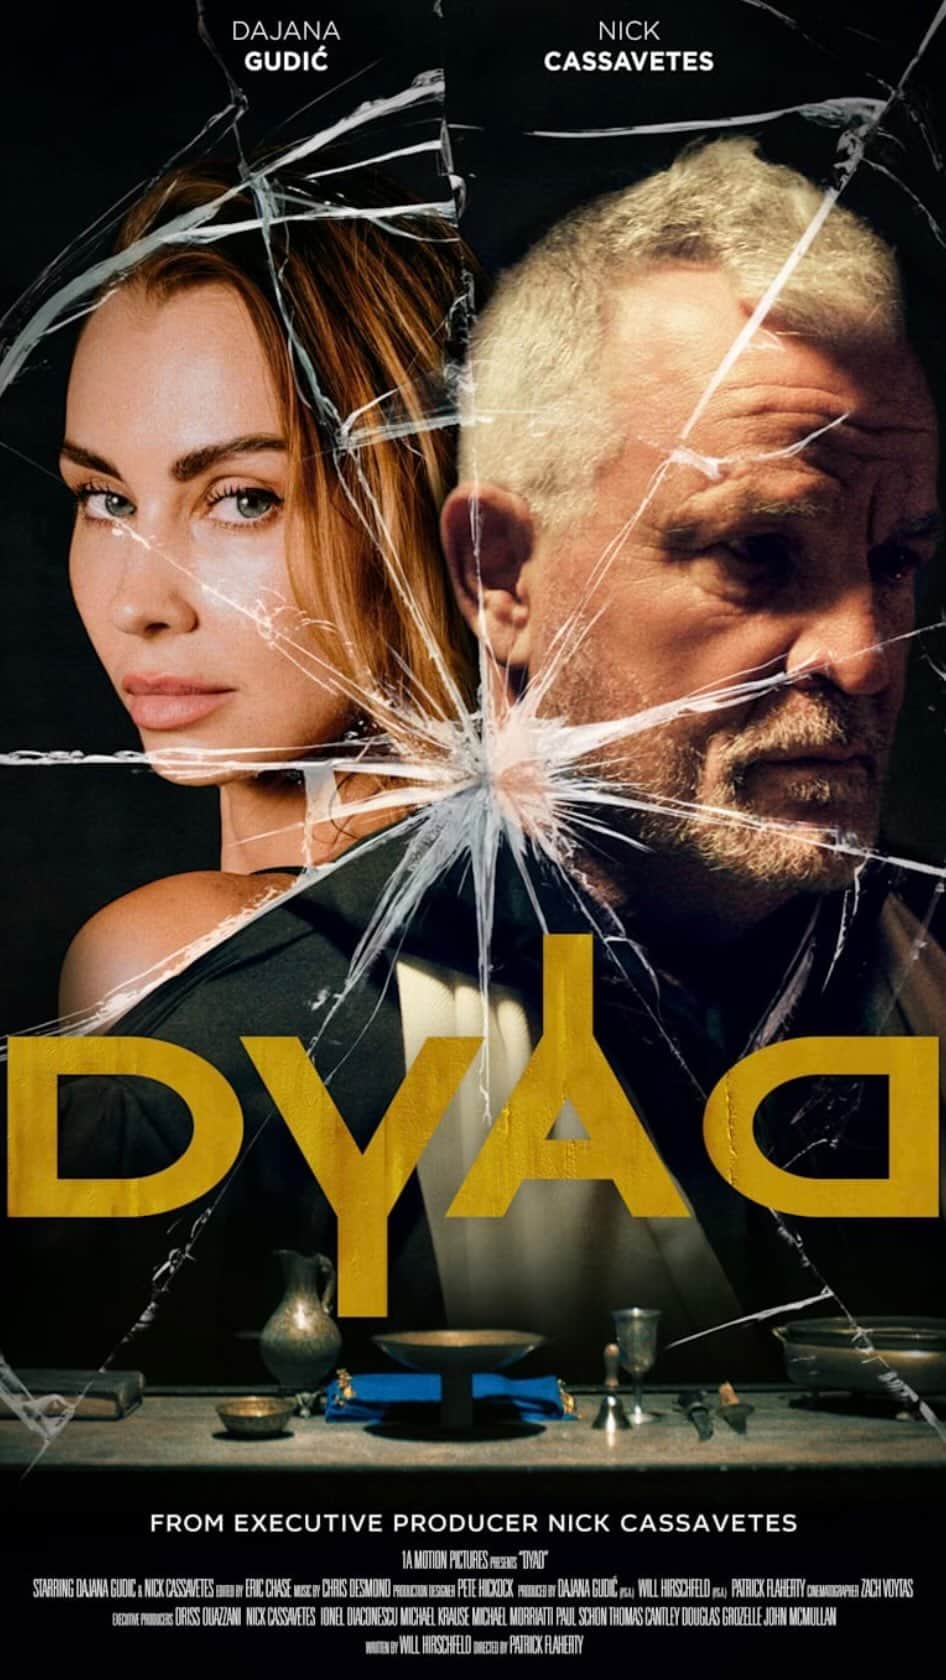 Dajana Gudicのインスタグラム：「SO excited for @dyadthemovie world premiere at @mammothfilmfestival this weekend 🎉 Thank you all for showing so much interest & selling out the theater before I even got to share the details 🥹 Can’t wait to hear what you think of the film! See you guys there ❤️」